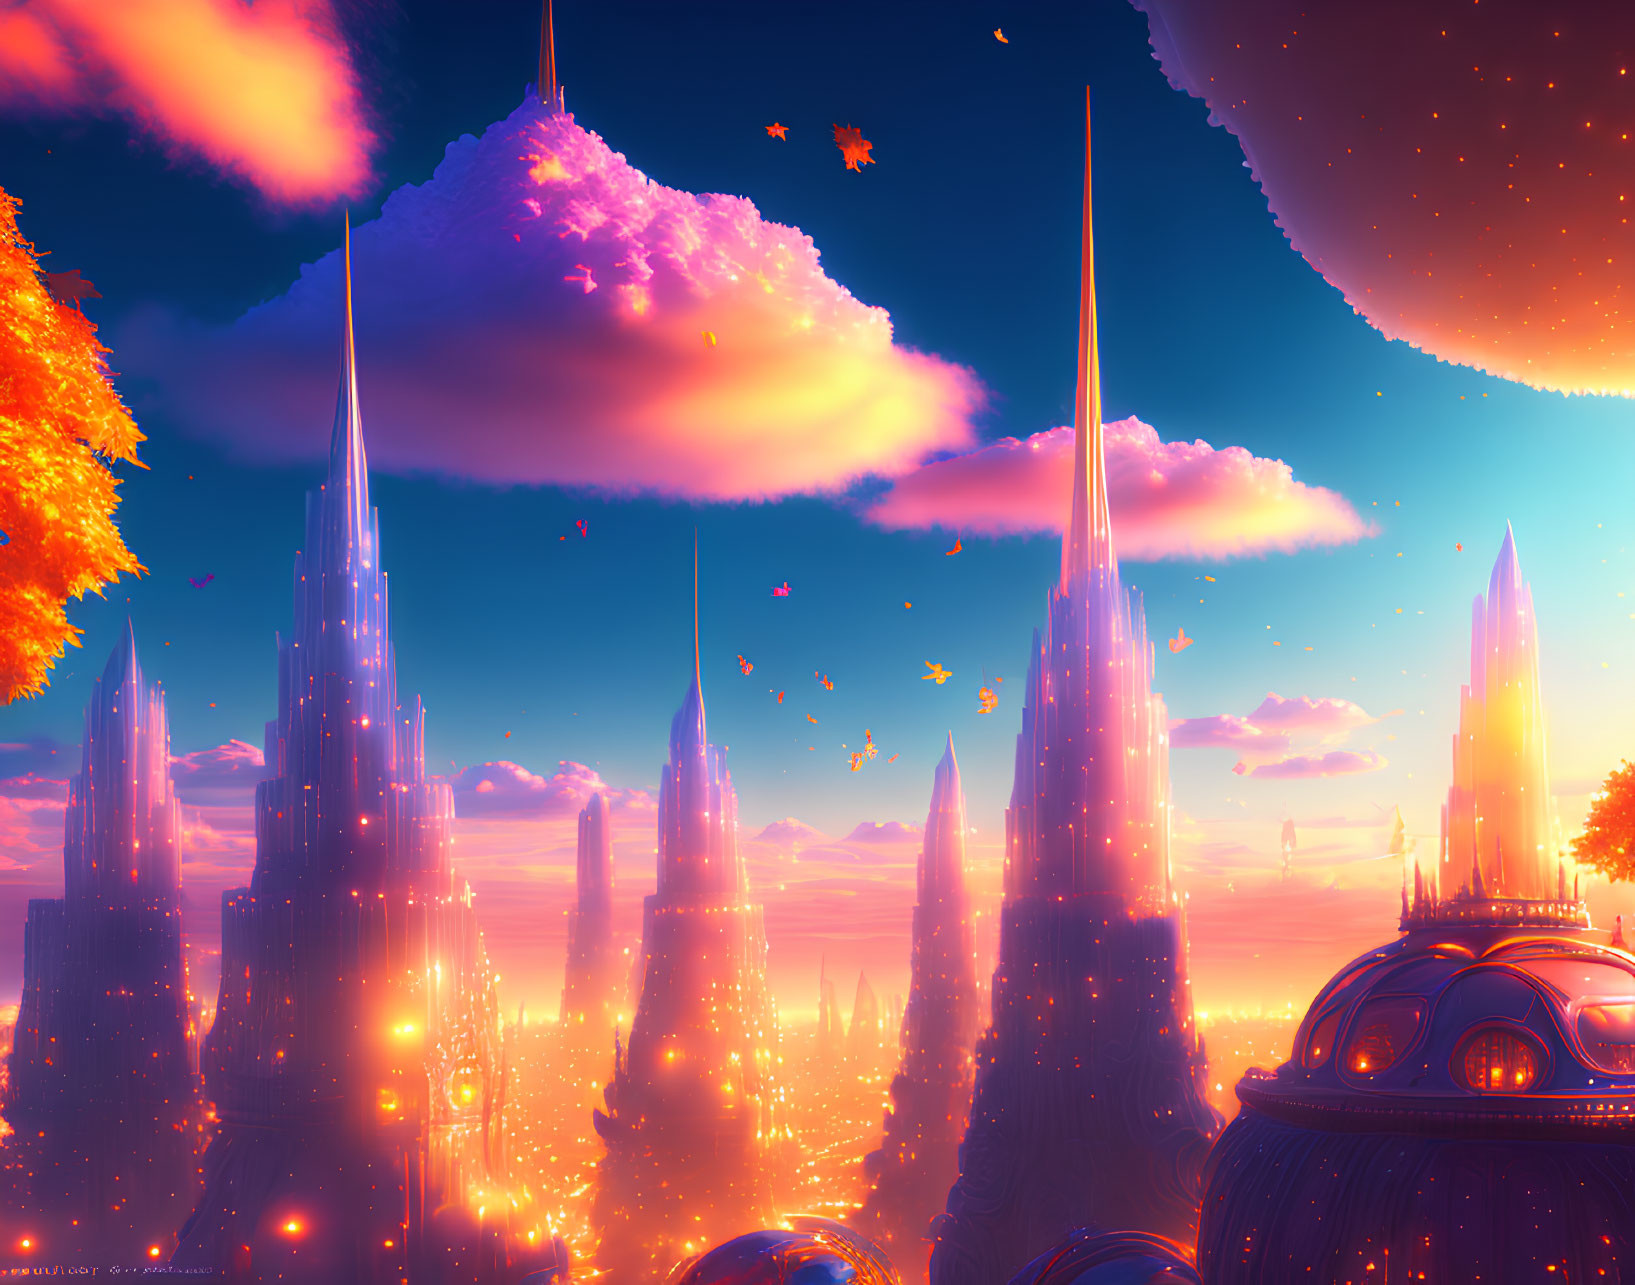 Fantastical cityscape with towering spires and floating islands at sunset